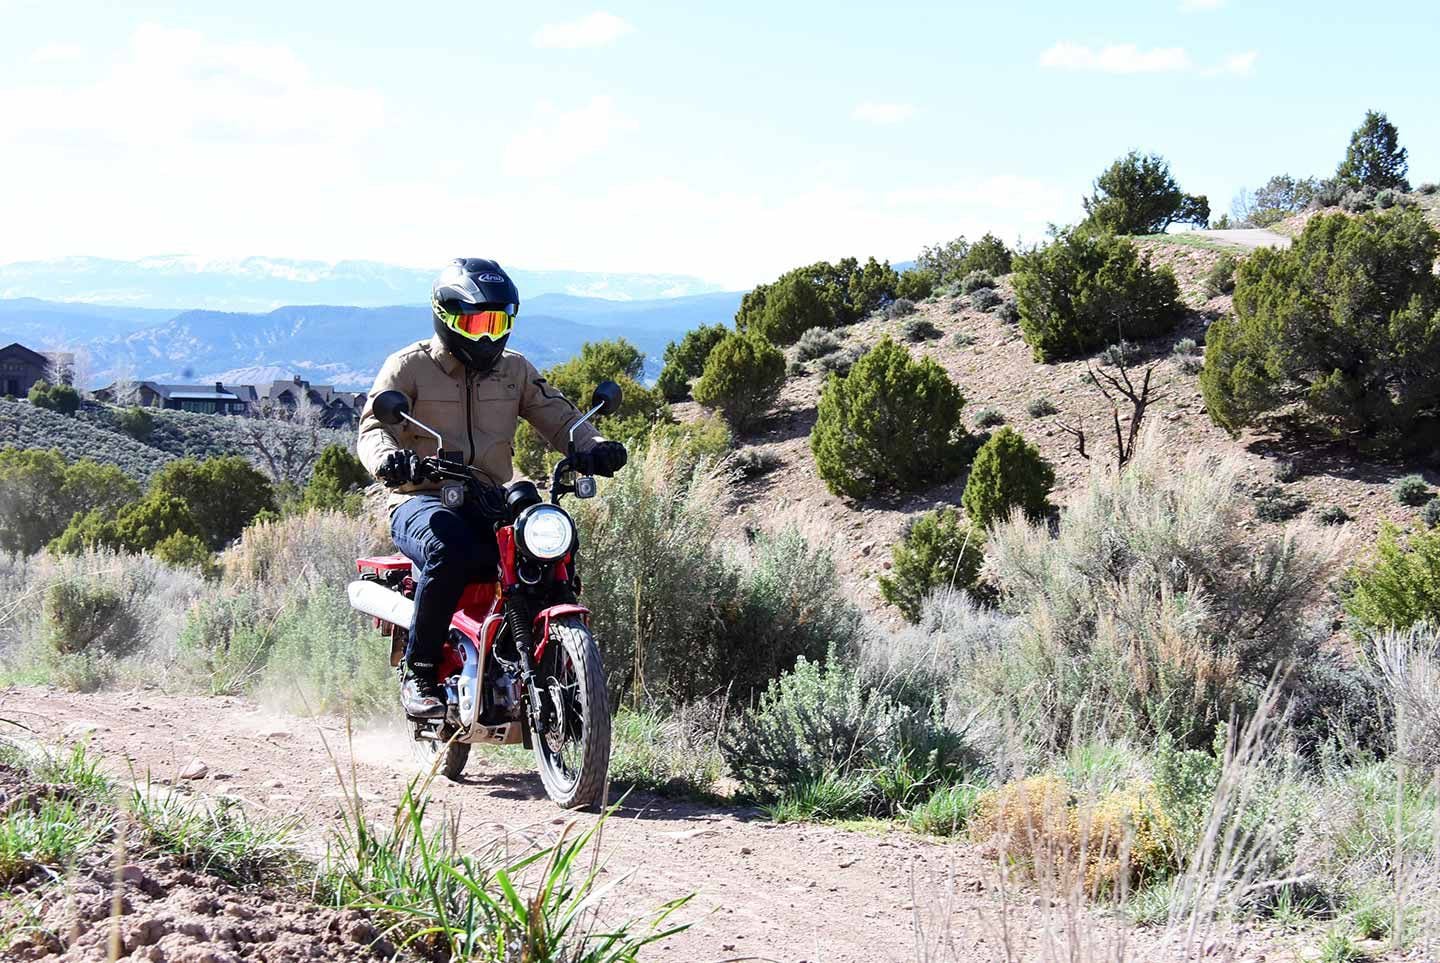 Dirt roads and double-track are where the Trail125 is the most happy off-road.